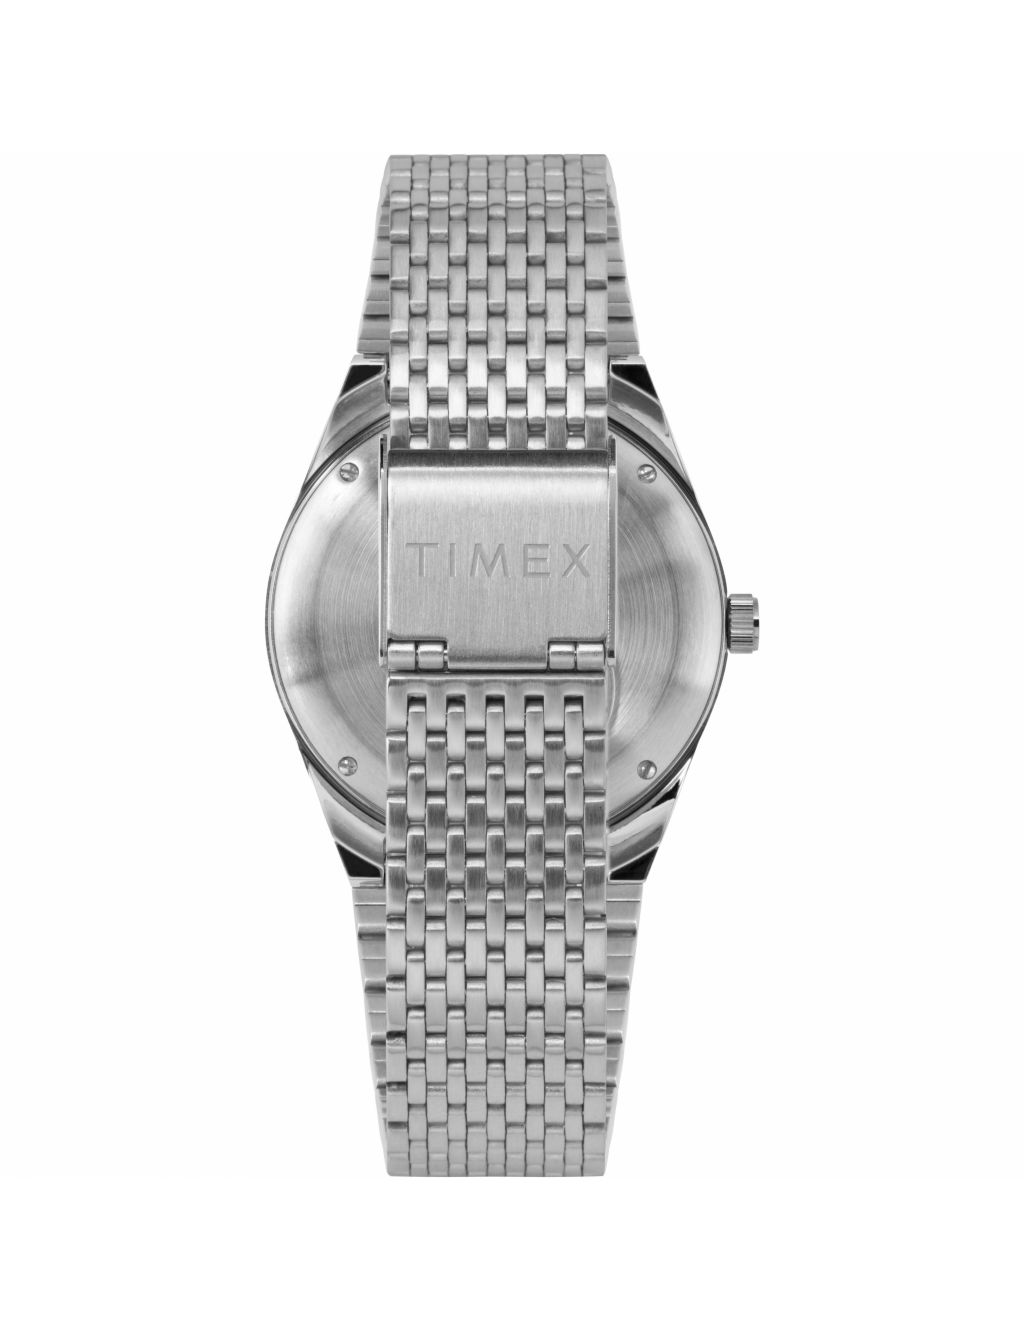 Timex Q Falcon Eye Stainless Steel Watch image 2